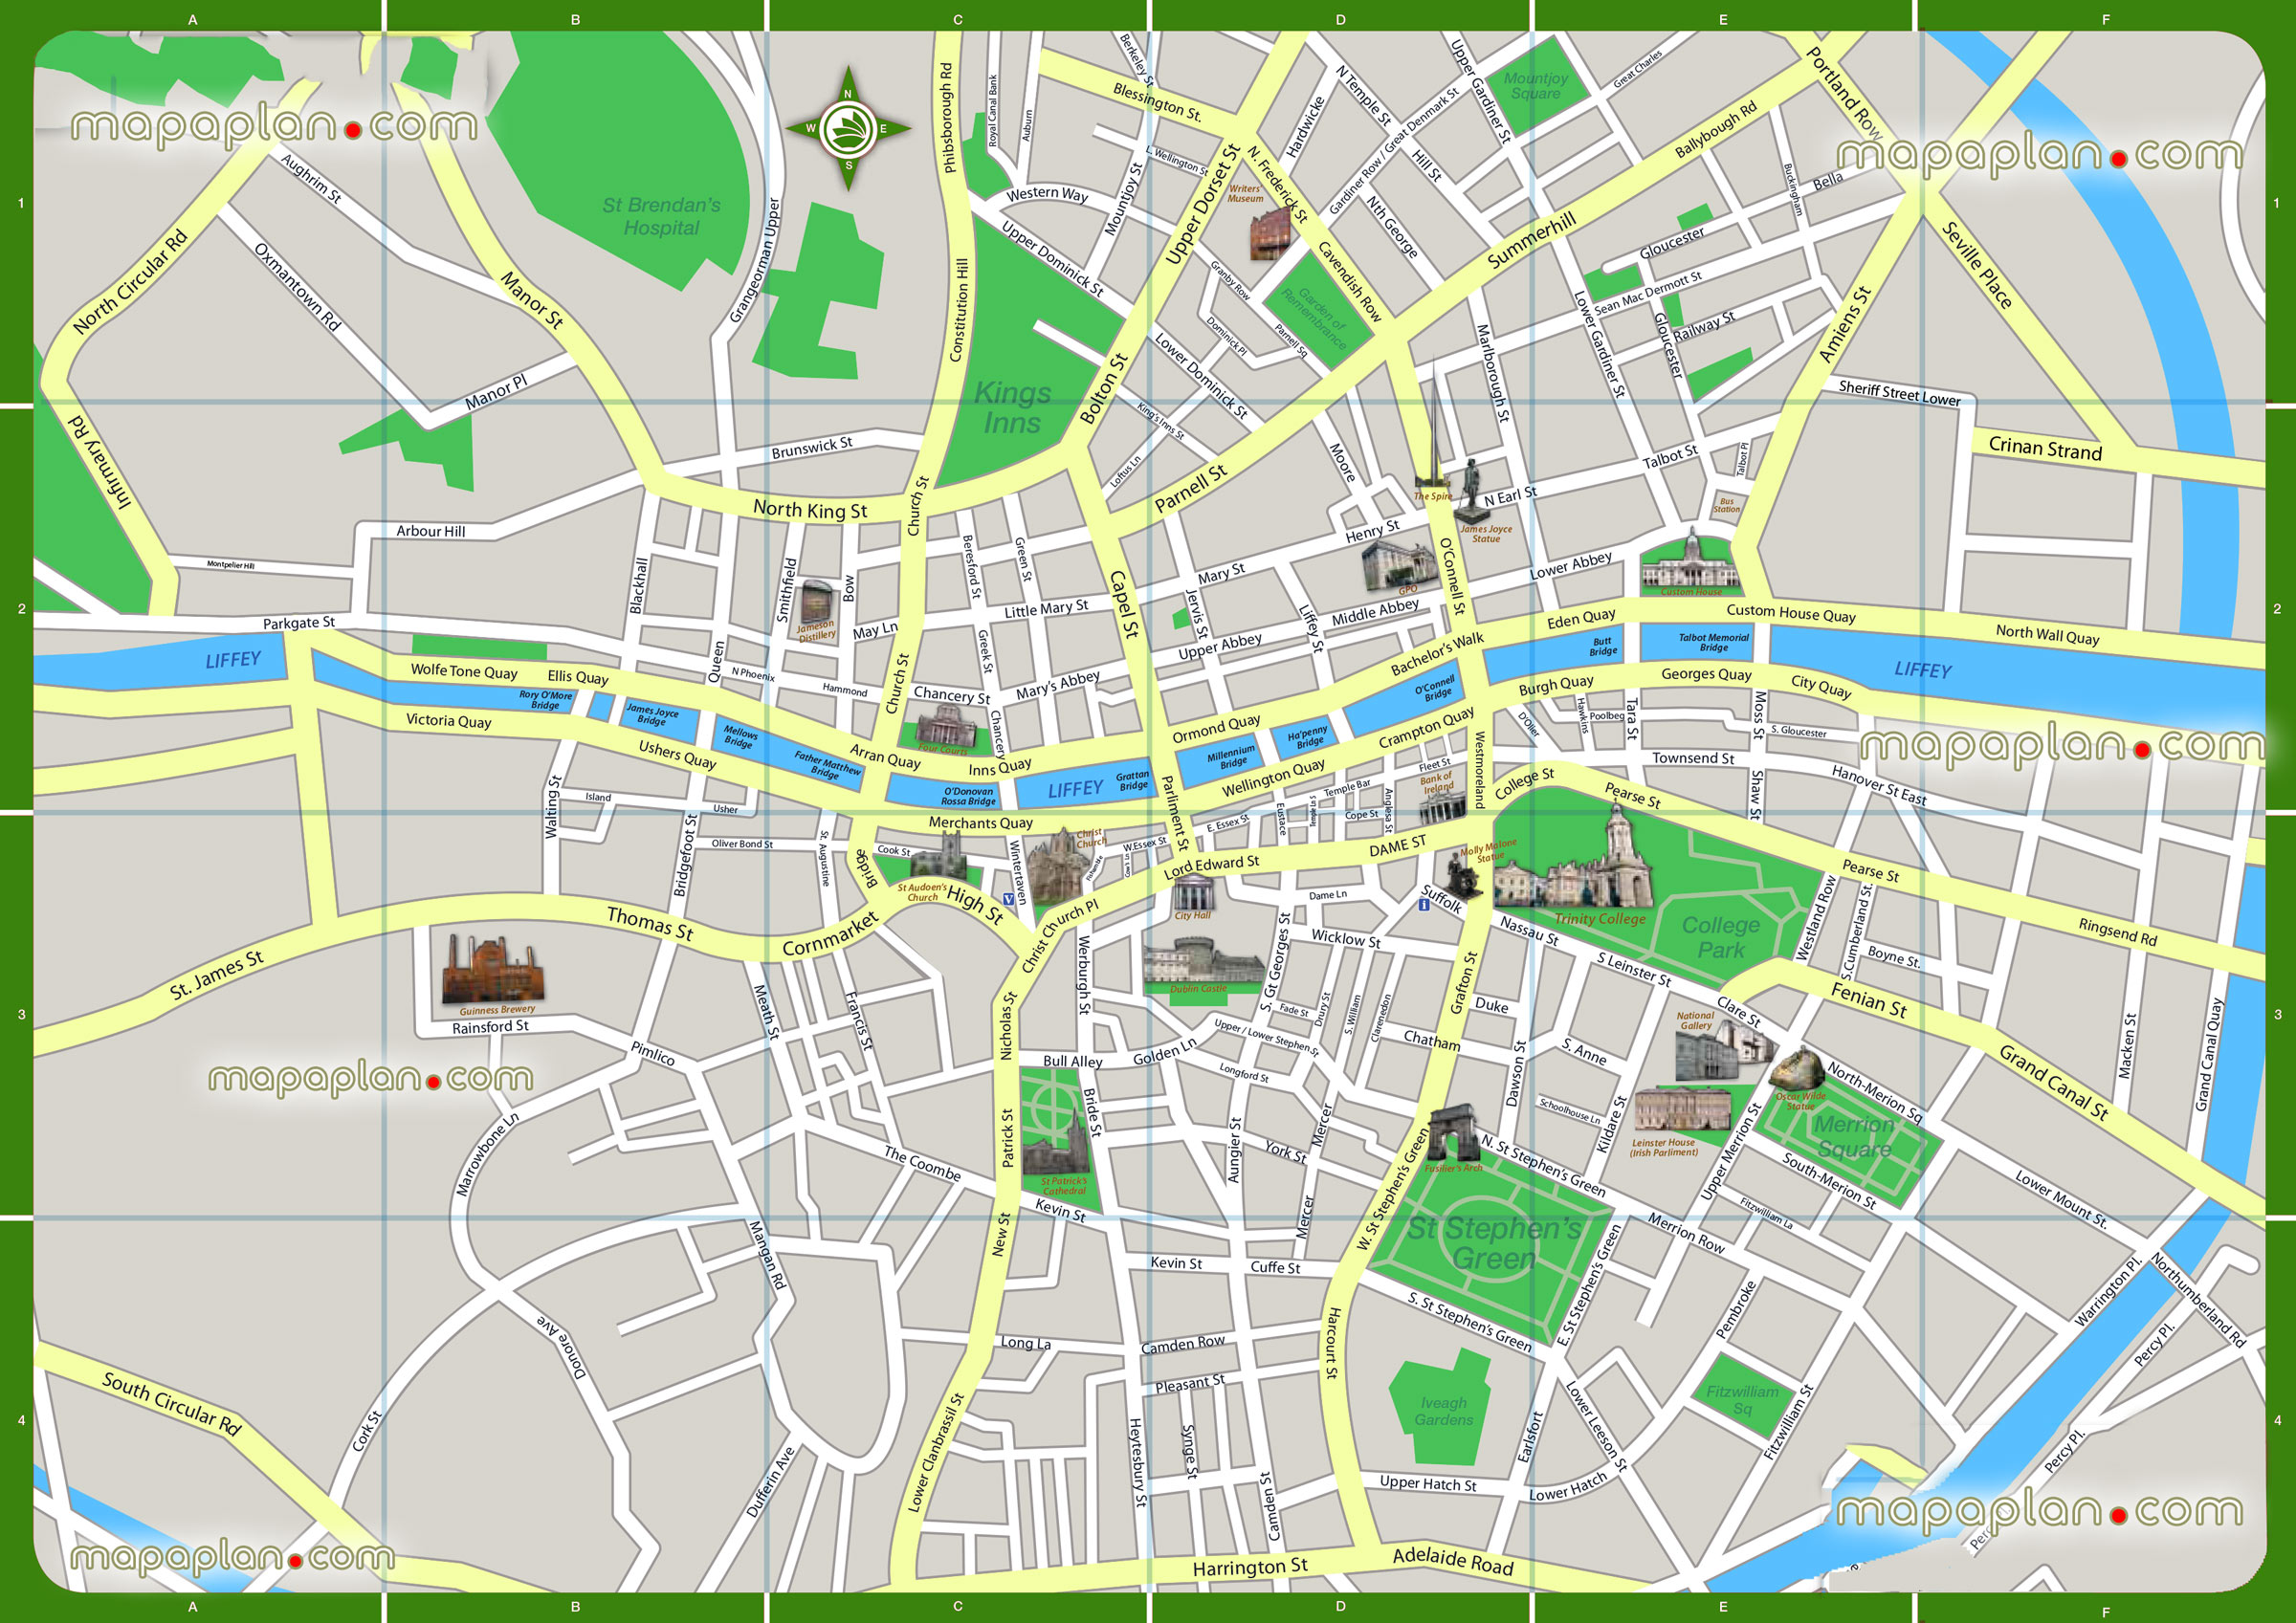 Dublin Top Tourist Attractions Map 04 Printable Walking Favourite Point Interest Visit City Centre Historic Spots Best Must See Sight High Resolution 